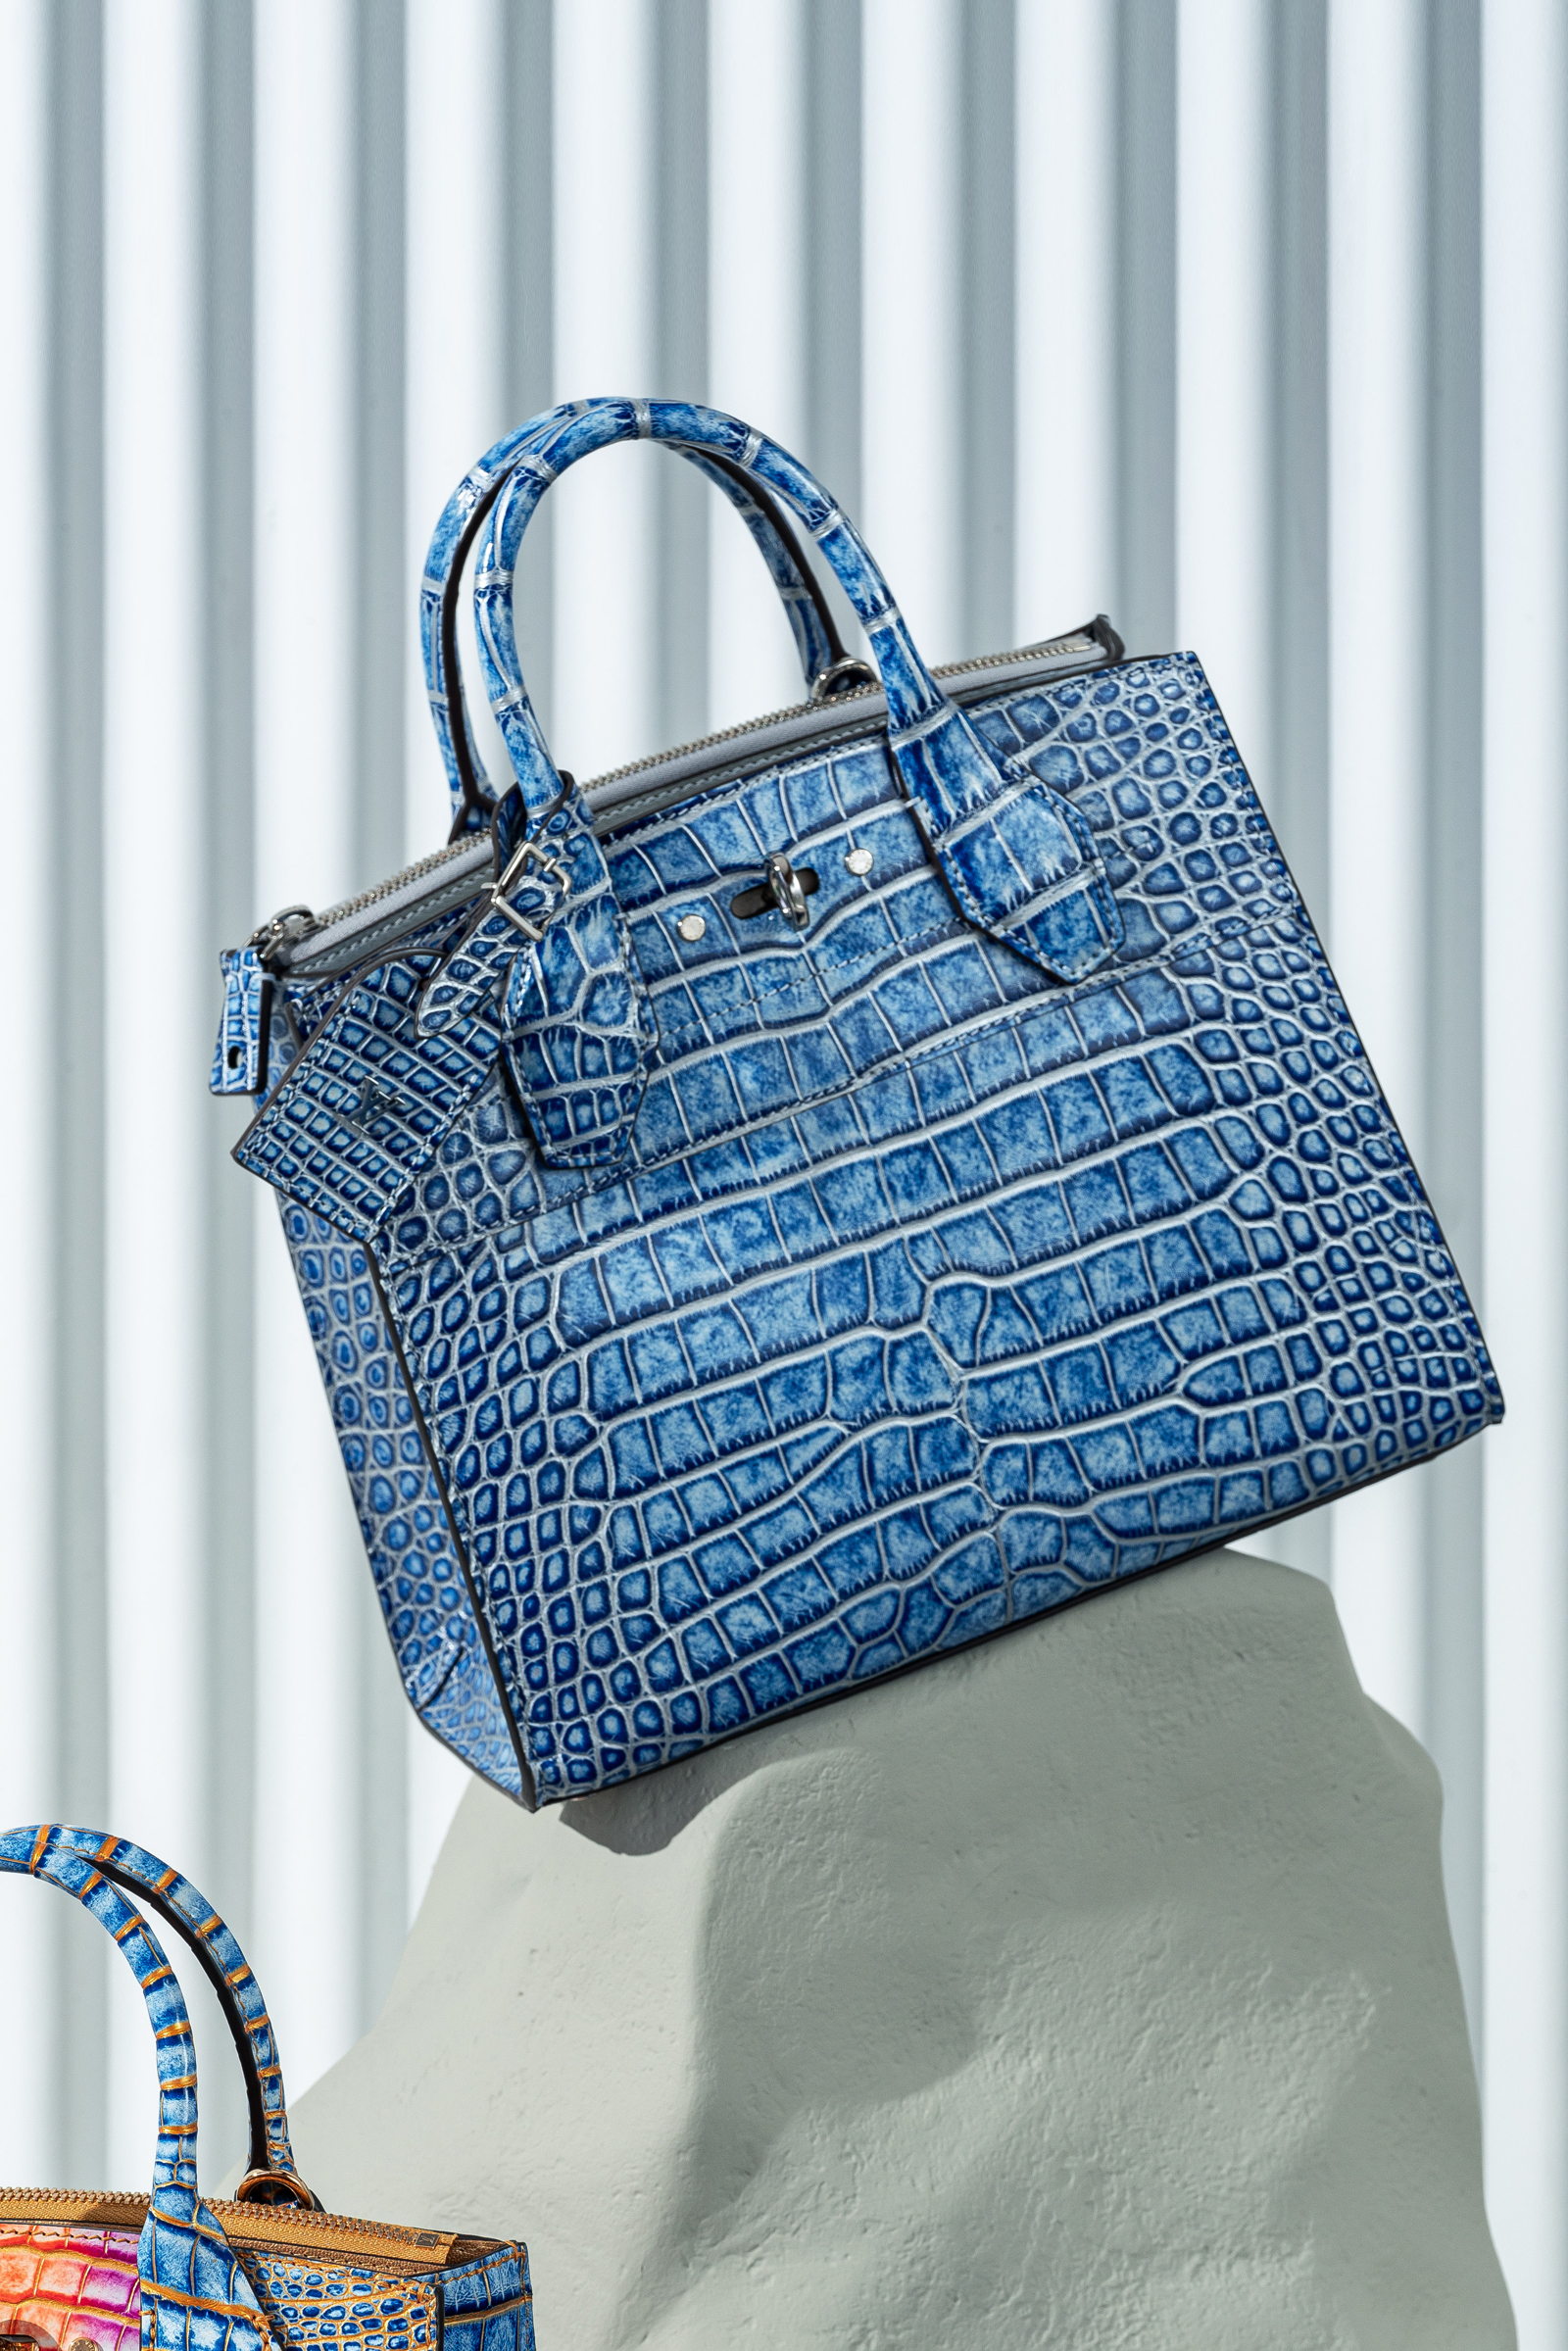 Discover A Rainbow In Louis Vuitton's Ultra Luxurious Exotic Skin Handbags